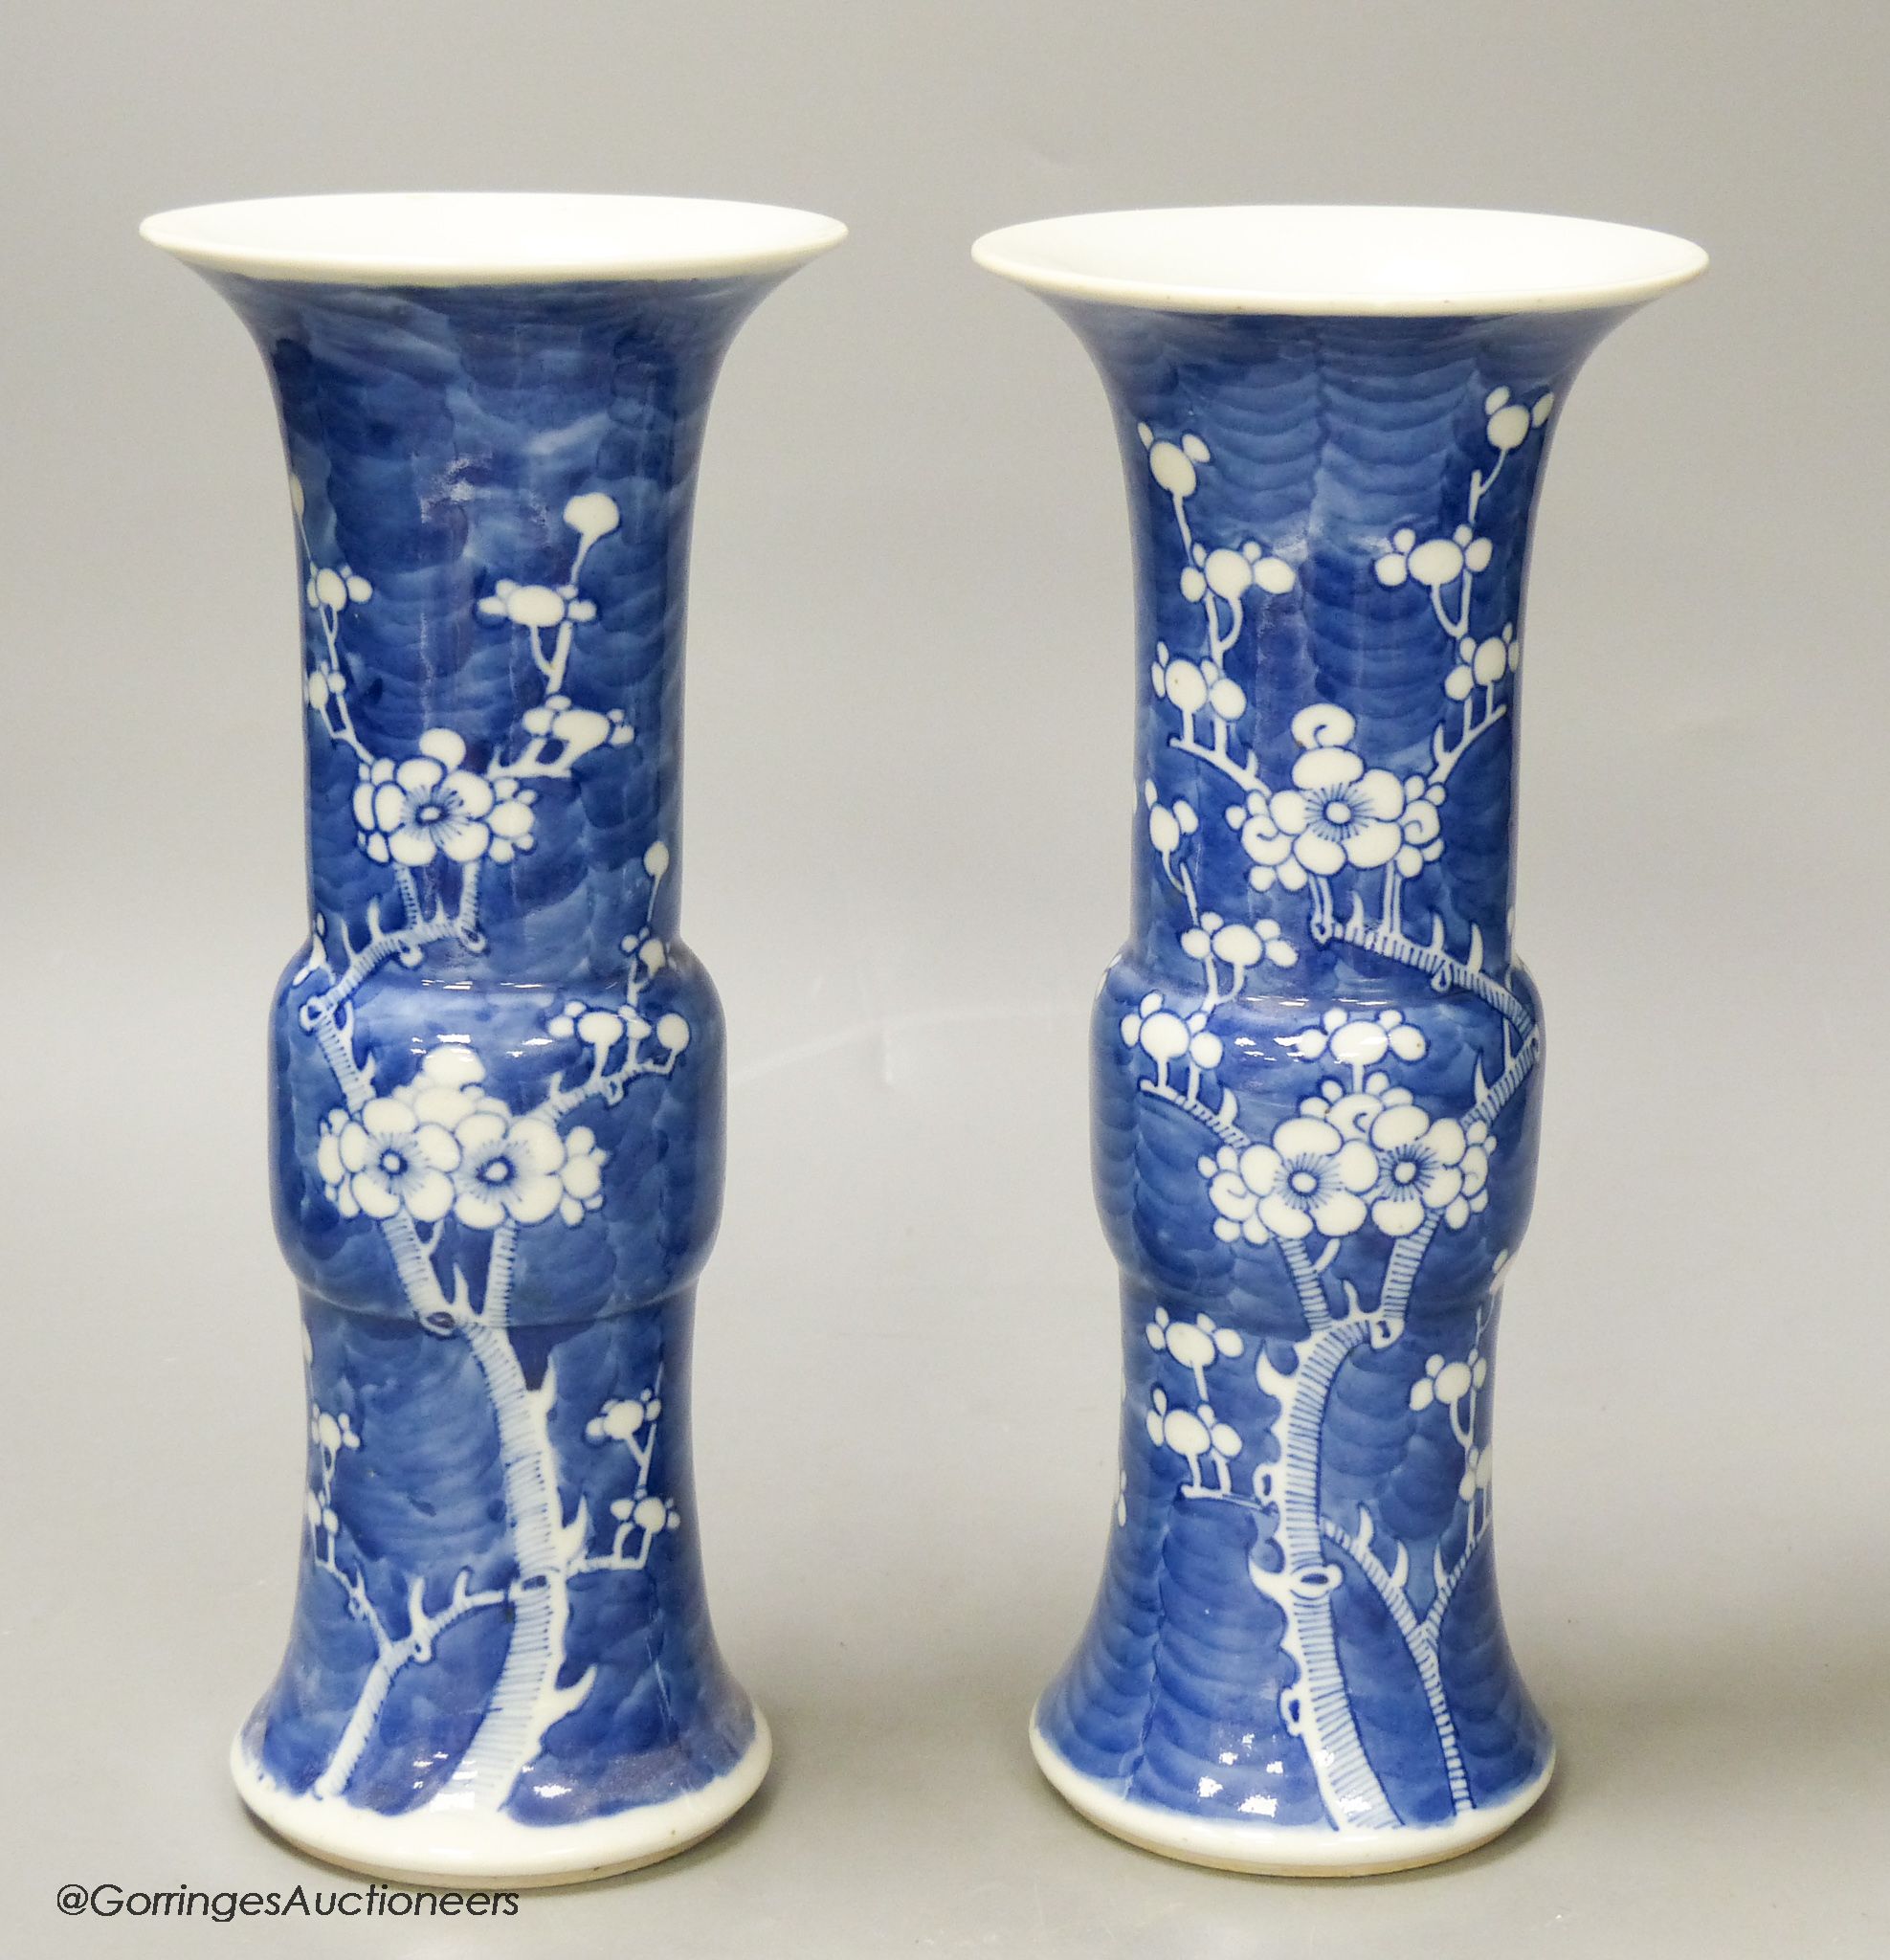 A pair of late 19th century Chinese blue and white prunus vases